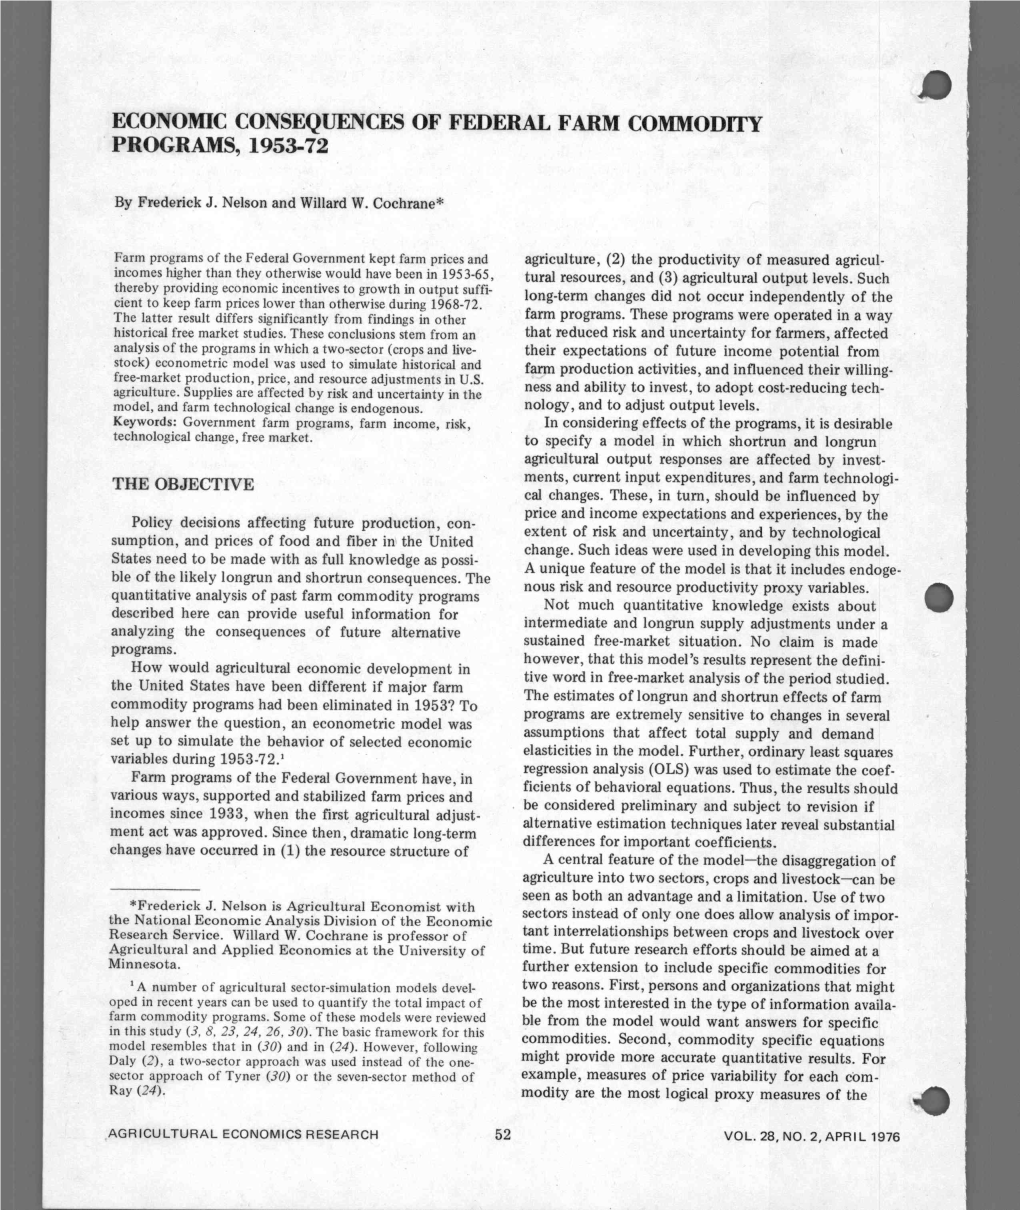 Economic Consequences of Federal Farm Commodity Programs, 1953-72